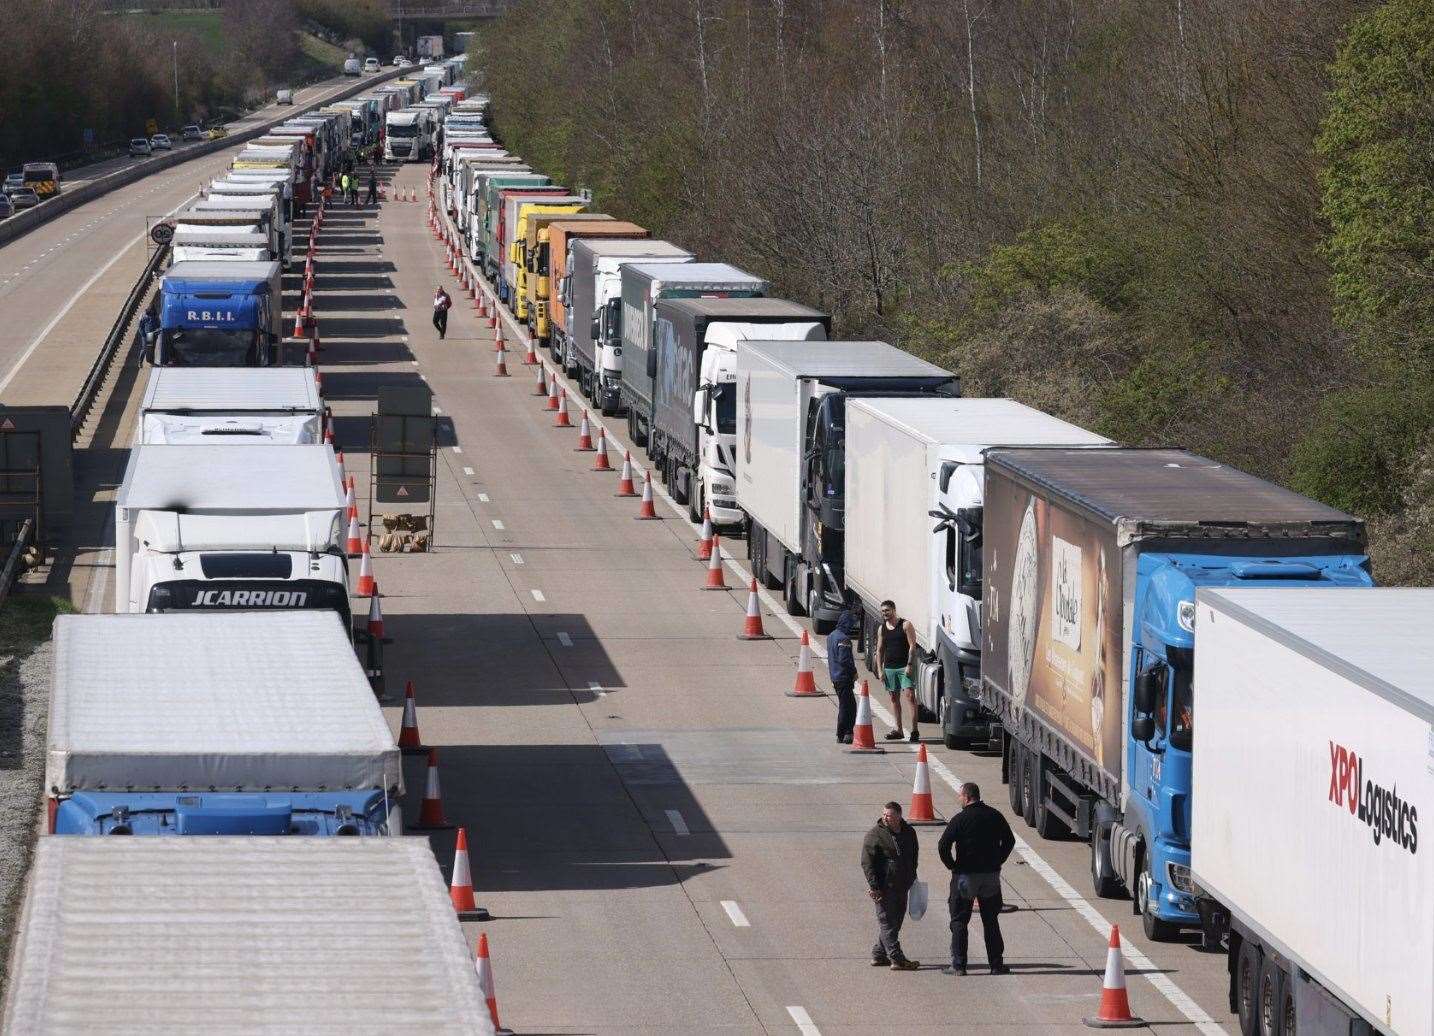 Lorries stacked up on the M20. Picture: UKNIP